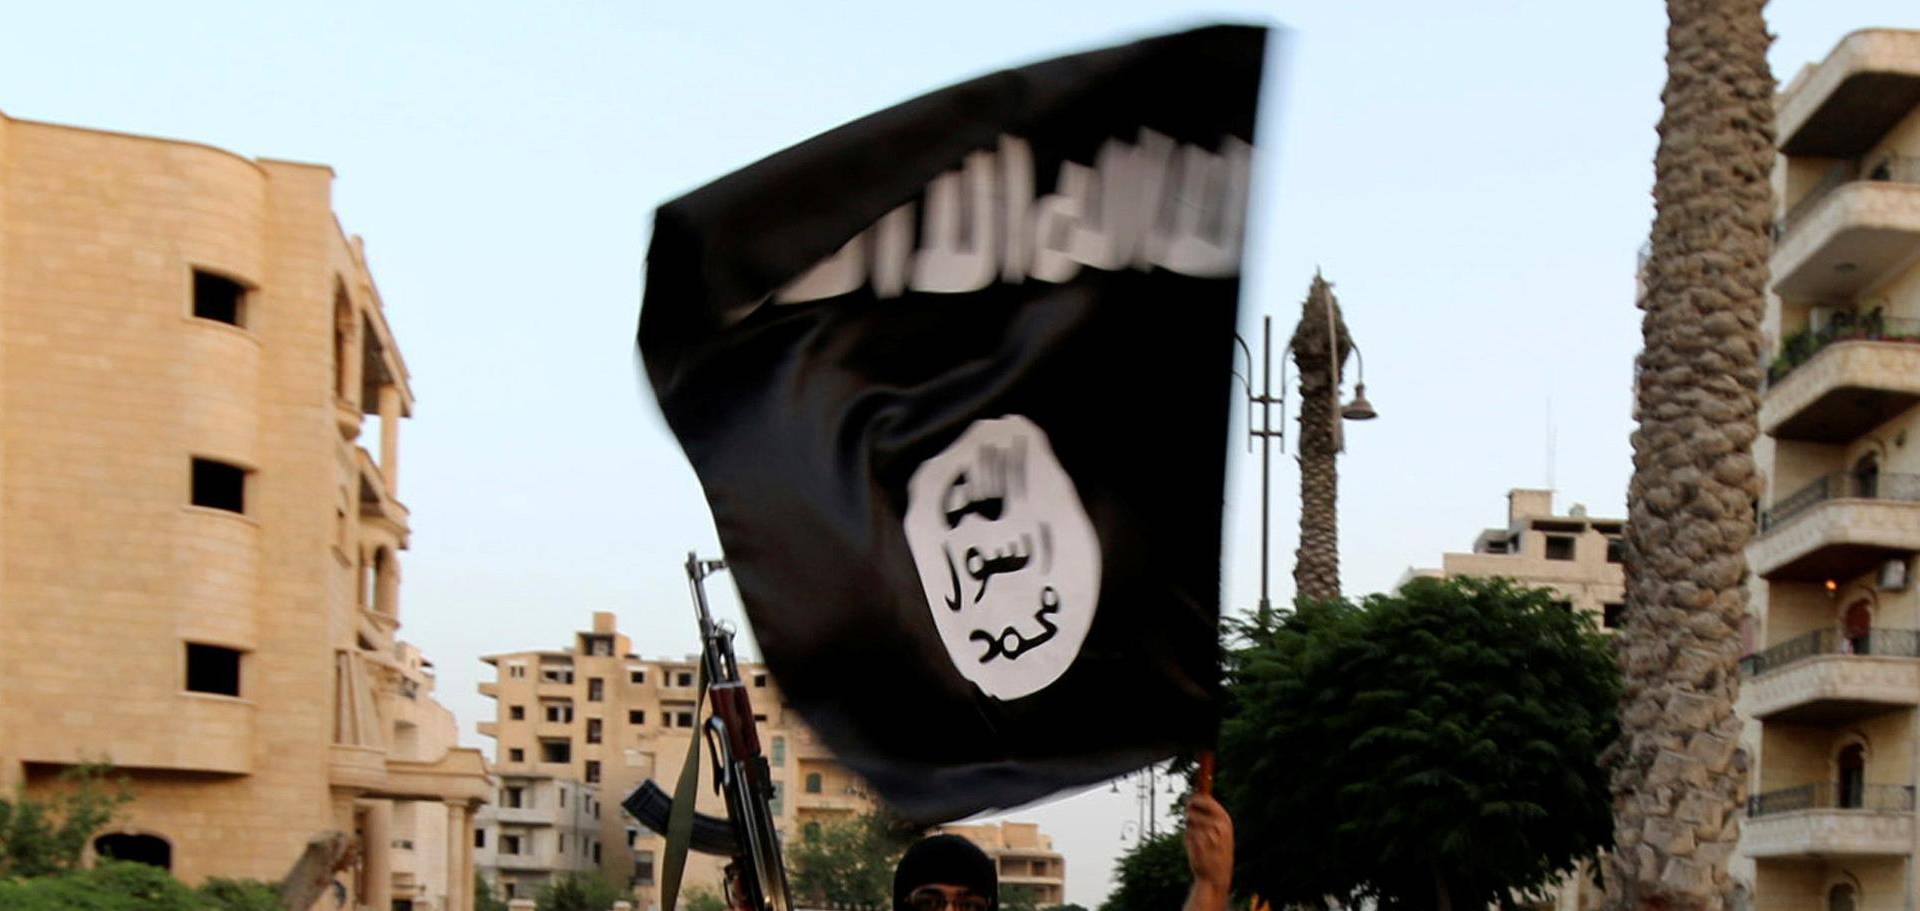 FILE PHOTO: A member loyal to the ISIL waves an ISIL flag in Raqqa